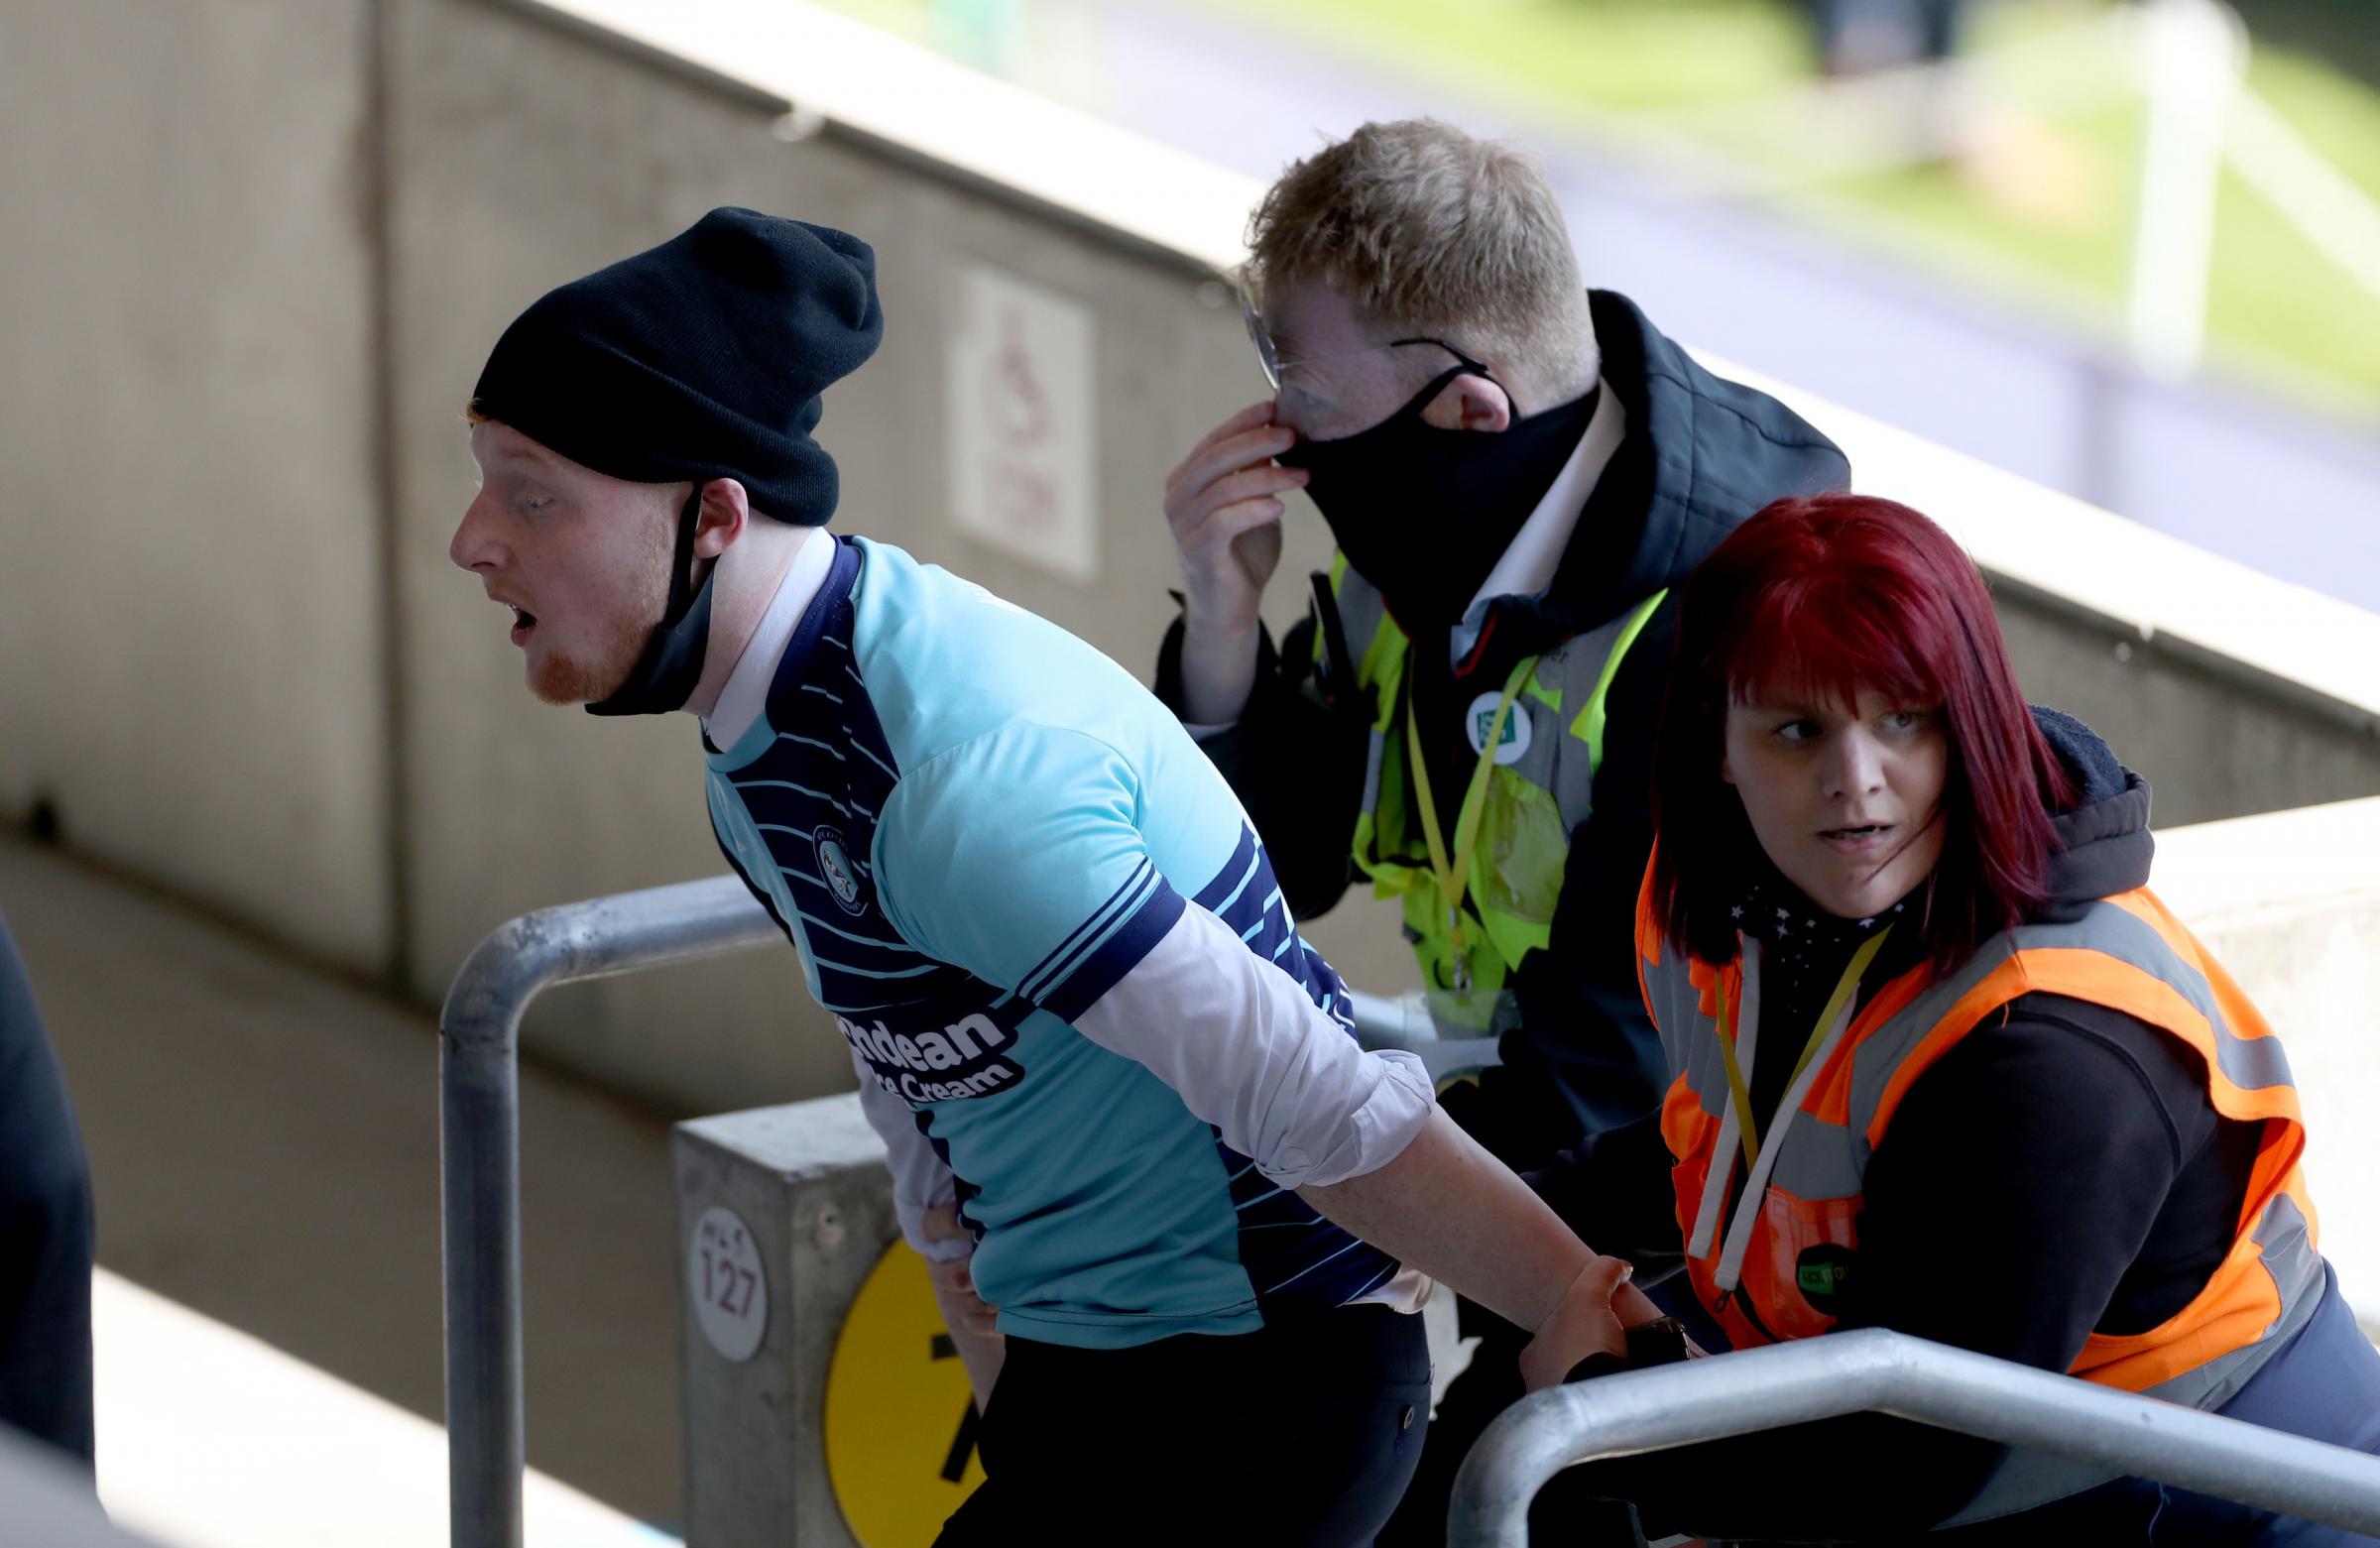 The Wycombe fan was seen at the Liberty Stadium on April 17 (PA)